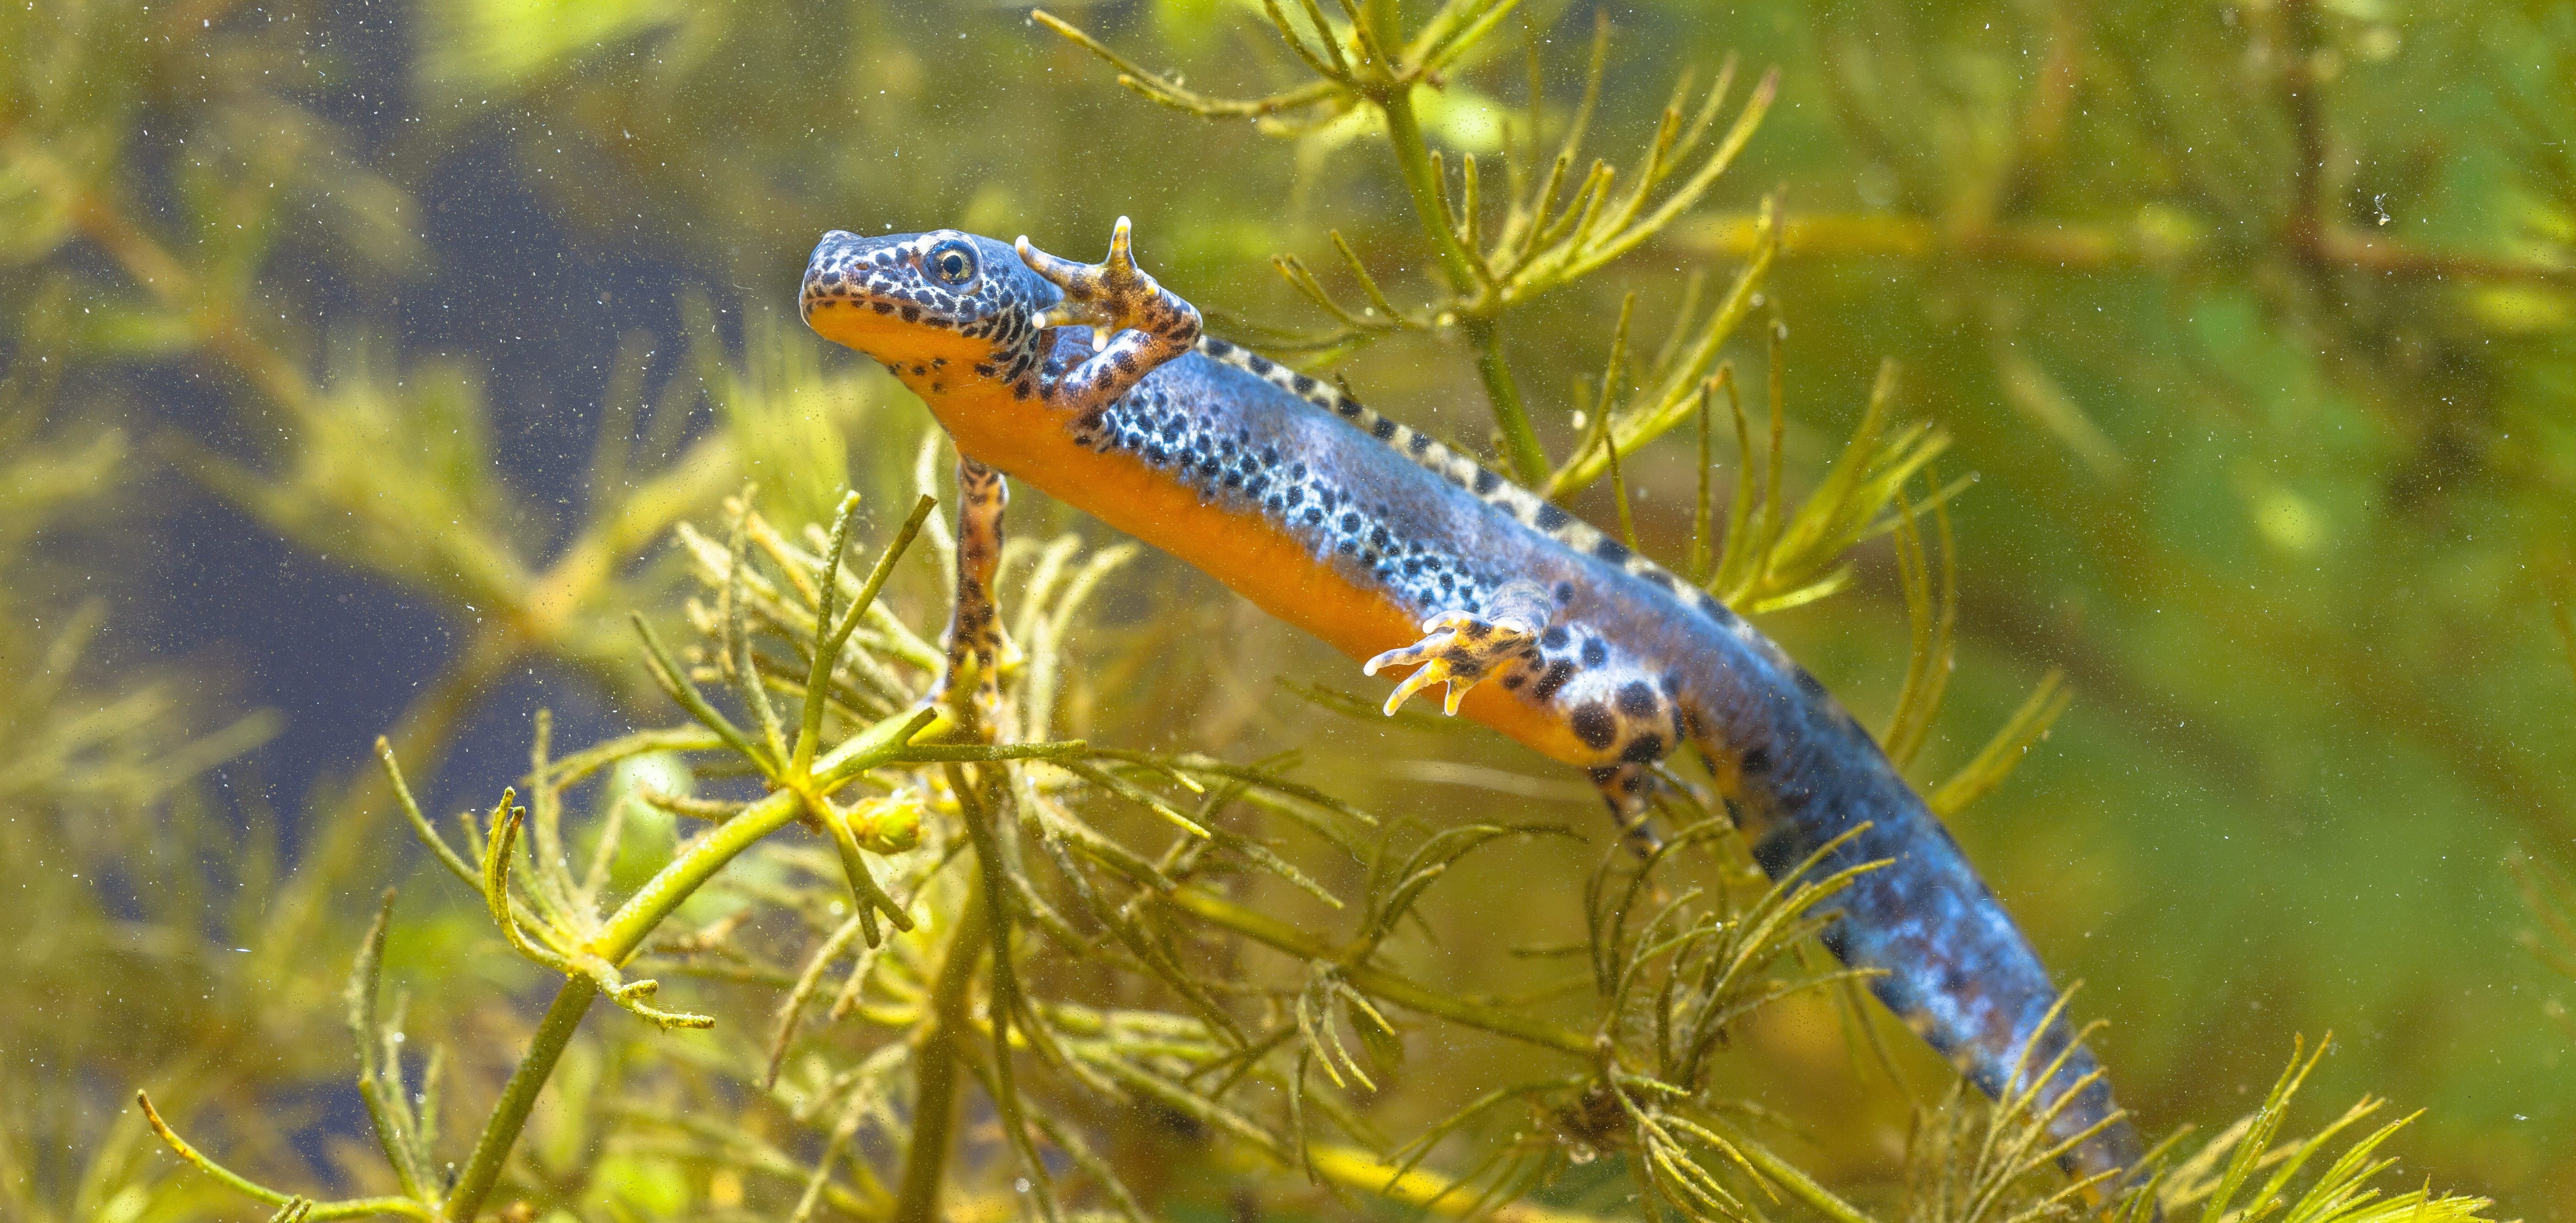 The mountain newt (Ichtyosaura alpestris), native to Central Europe, normally undergoes metamorphosis and lives temporarily on land, but there are also populations with neotenous animals. | Rudmer Zwerver/Shuttestock